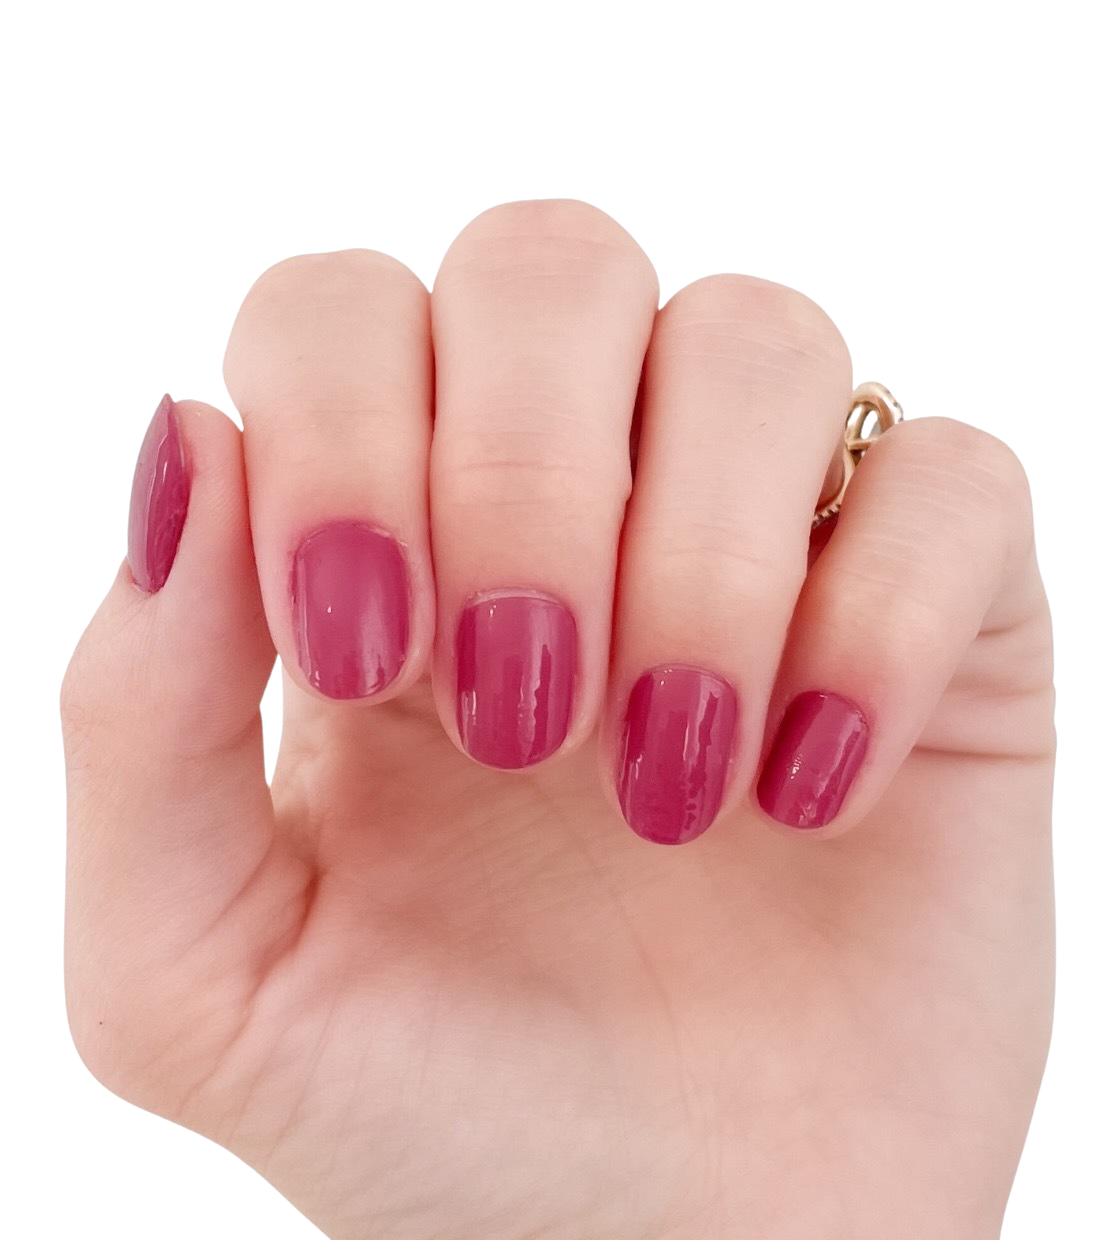 Indie Nails Fine Wine is Free of 12 toxins vegan cruelty-free quick dry  glossy finish chip resistant. Wine Maroon Colour shade Nail polish, enamel,  lacquer, paint Liquid: 5 ml